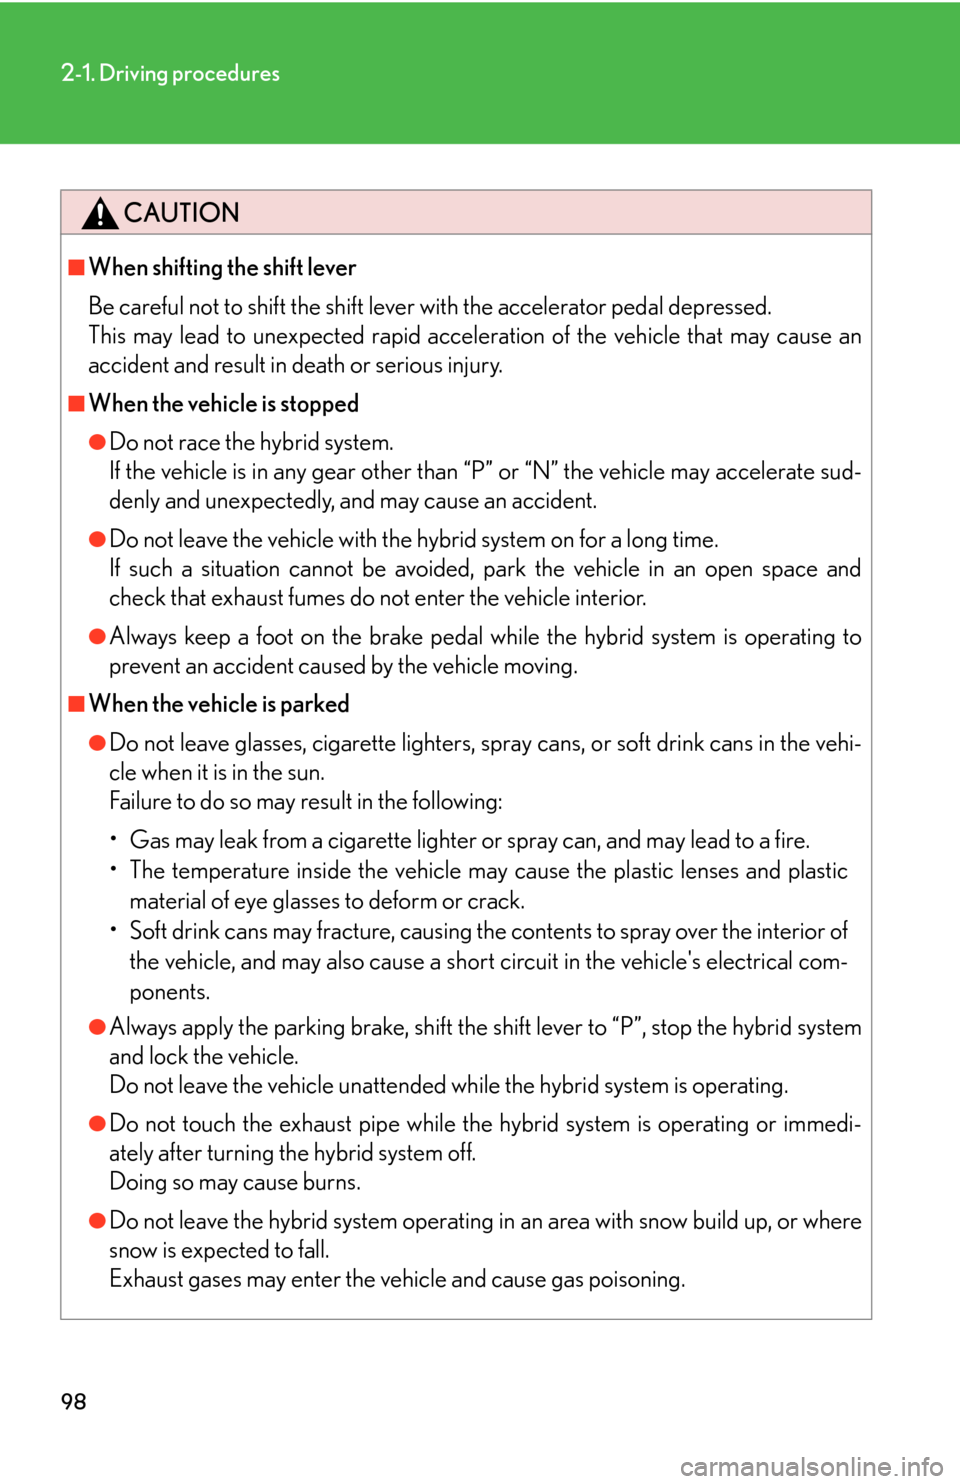 Lexus GS450h 2007  Scheduled Maintenance Guide / LEXUS 2007 GS450H THROUGH JUNE 2006 PROD. OWNERS MANUAL (OM30727U) 98
2-1. Driving procedures
CAUTION
■When shifting the shift lever
Be careful not to shift the shift lever with the accelerator pedal depressed.
This may lead to unexpected rapid acceleration of t